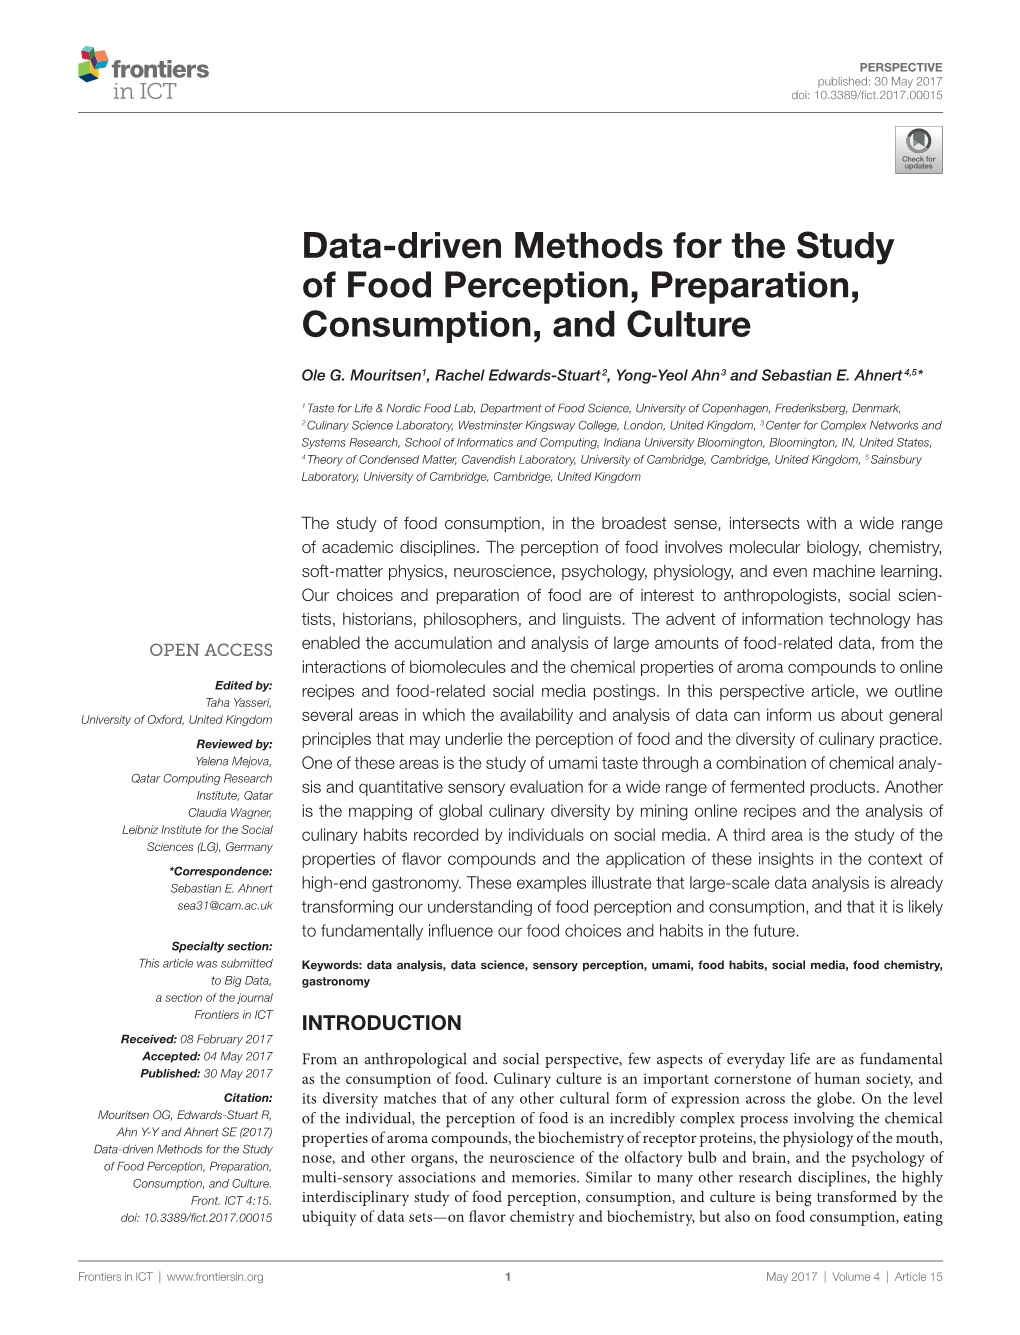 Data-Driven Methods for the Study of Food Perception, Preparation, Consumption, and Culture